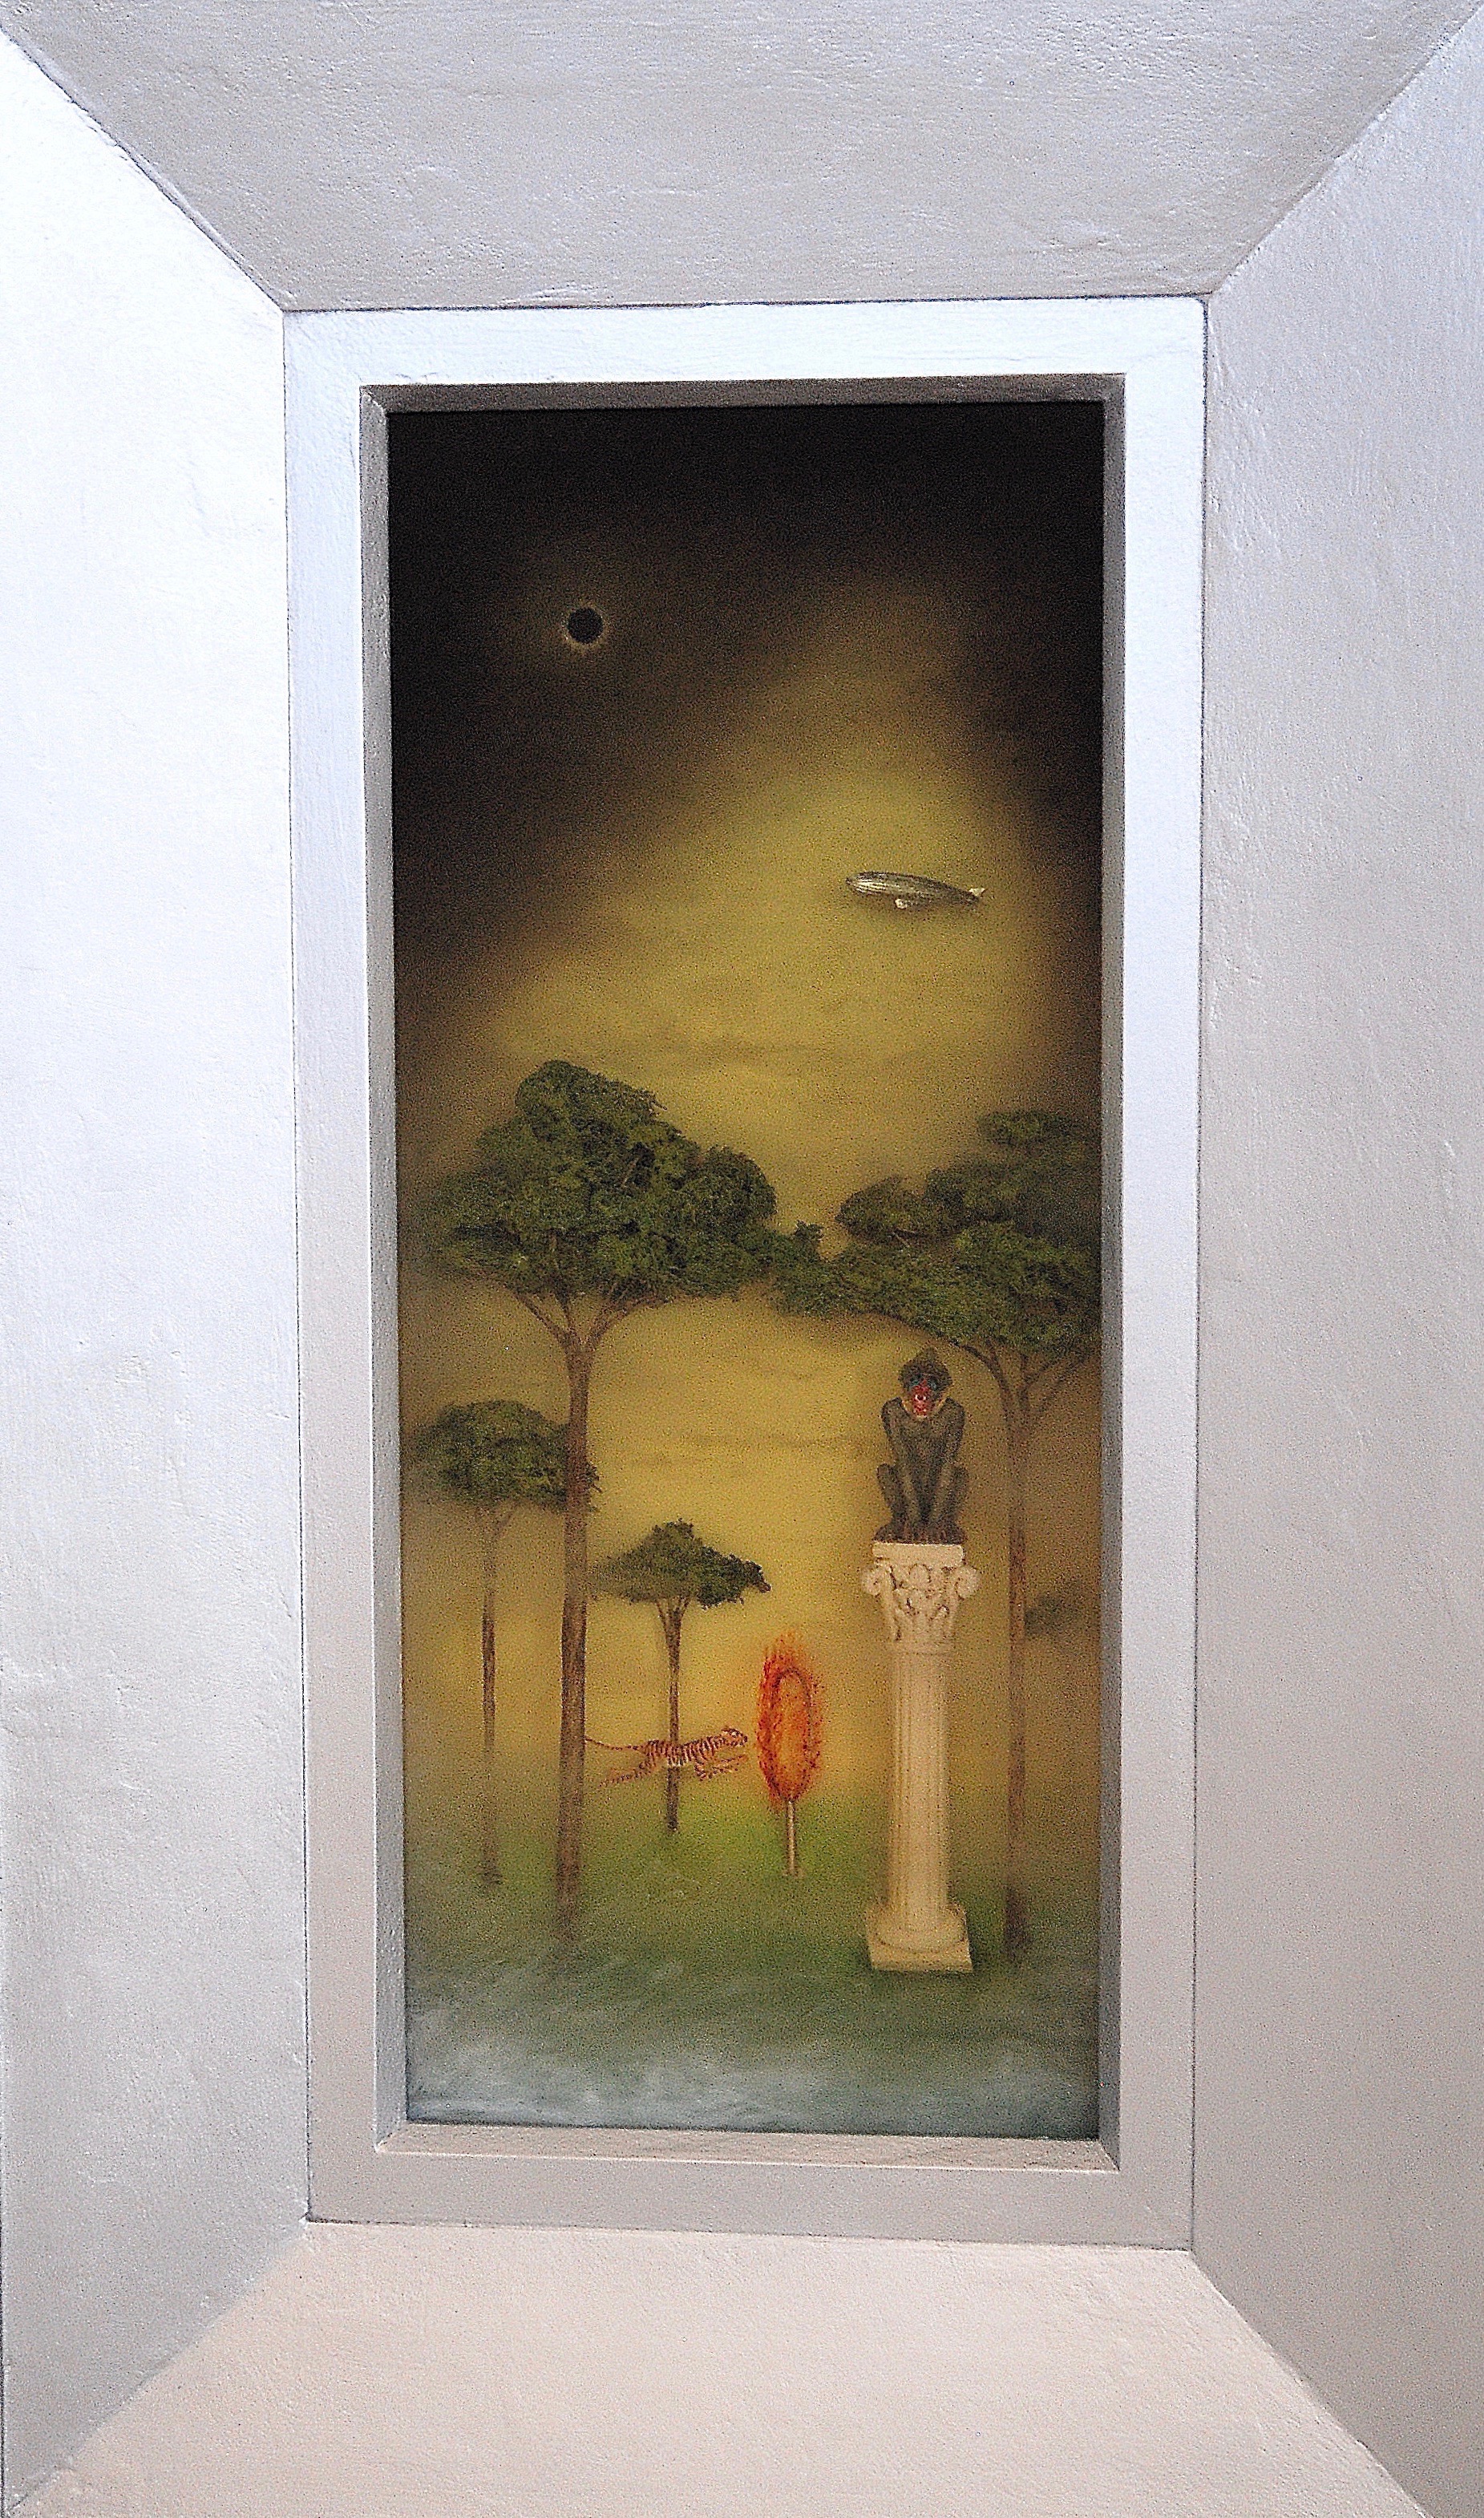 Thomas Coffin - Mandrill Eclipse, 19 1/2"h x 9 1/2"w x 2"d, mixed media 3-d diorama encased in acrylic resin, handmade wood frame